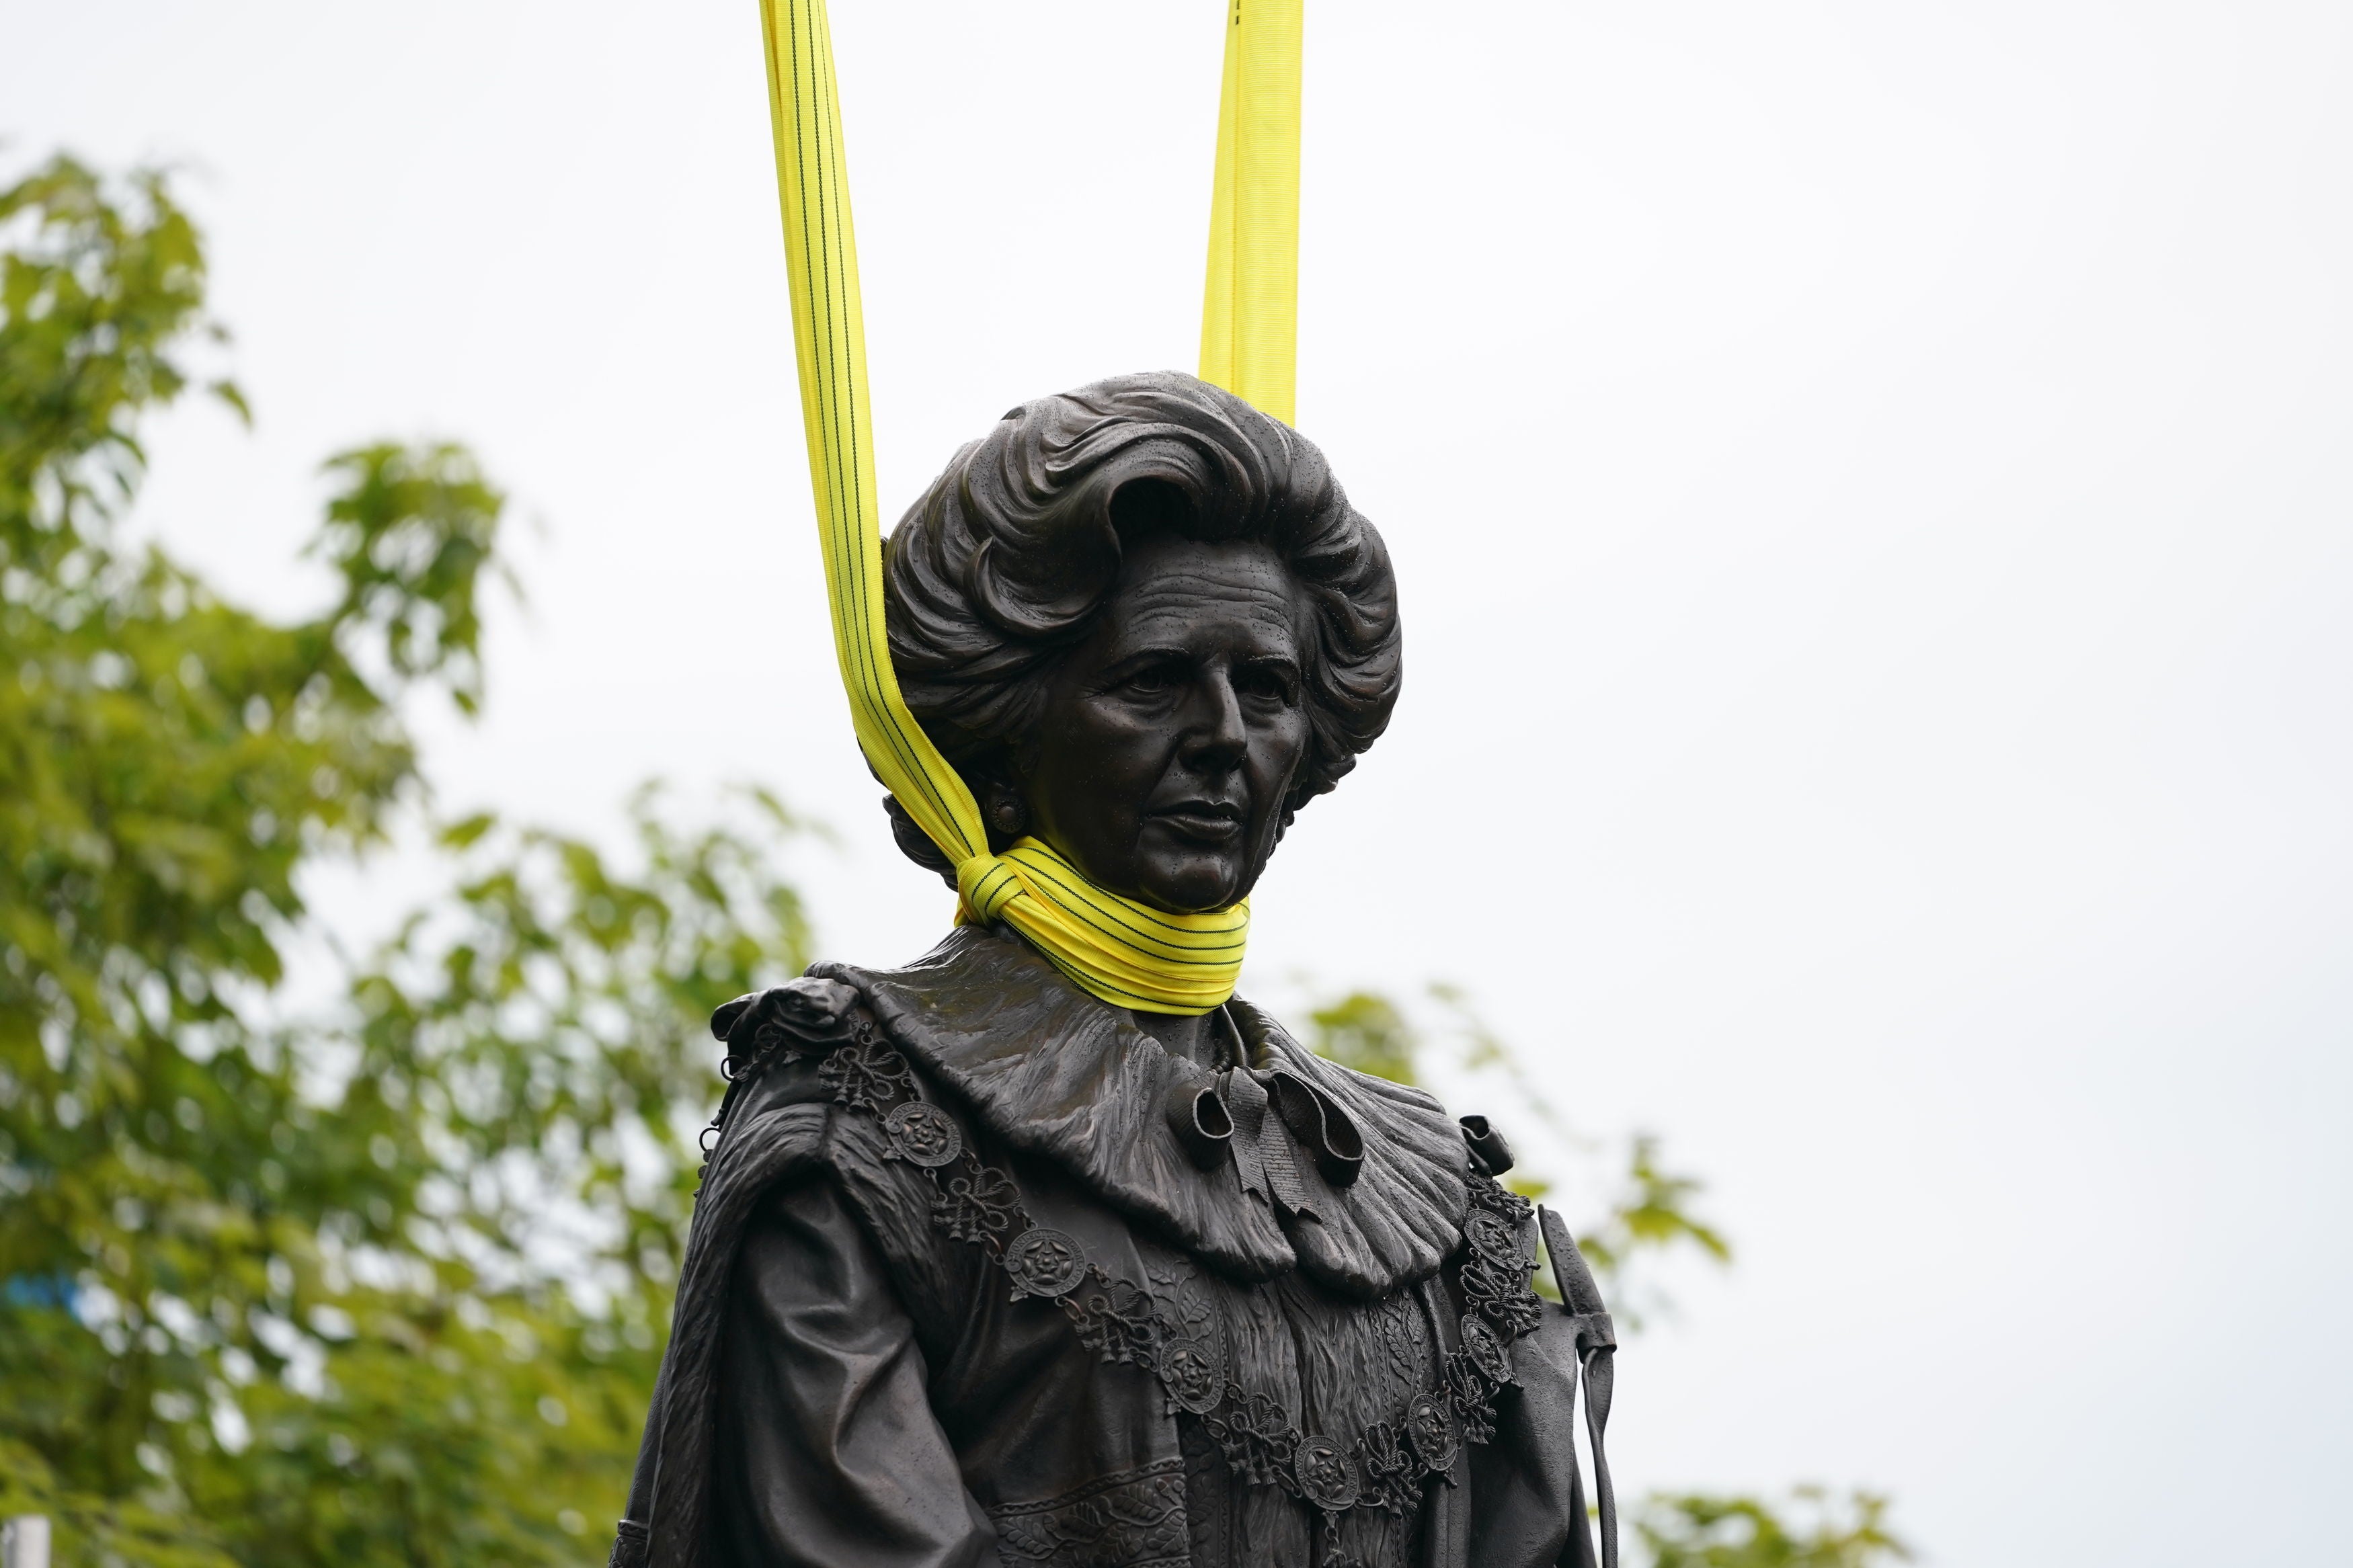 A statue of Baroness Margaret Thatcher is put into place on 15 May, 2022, in Grantham, Lincolnshire